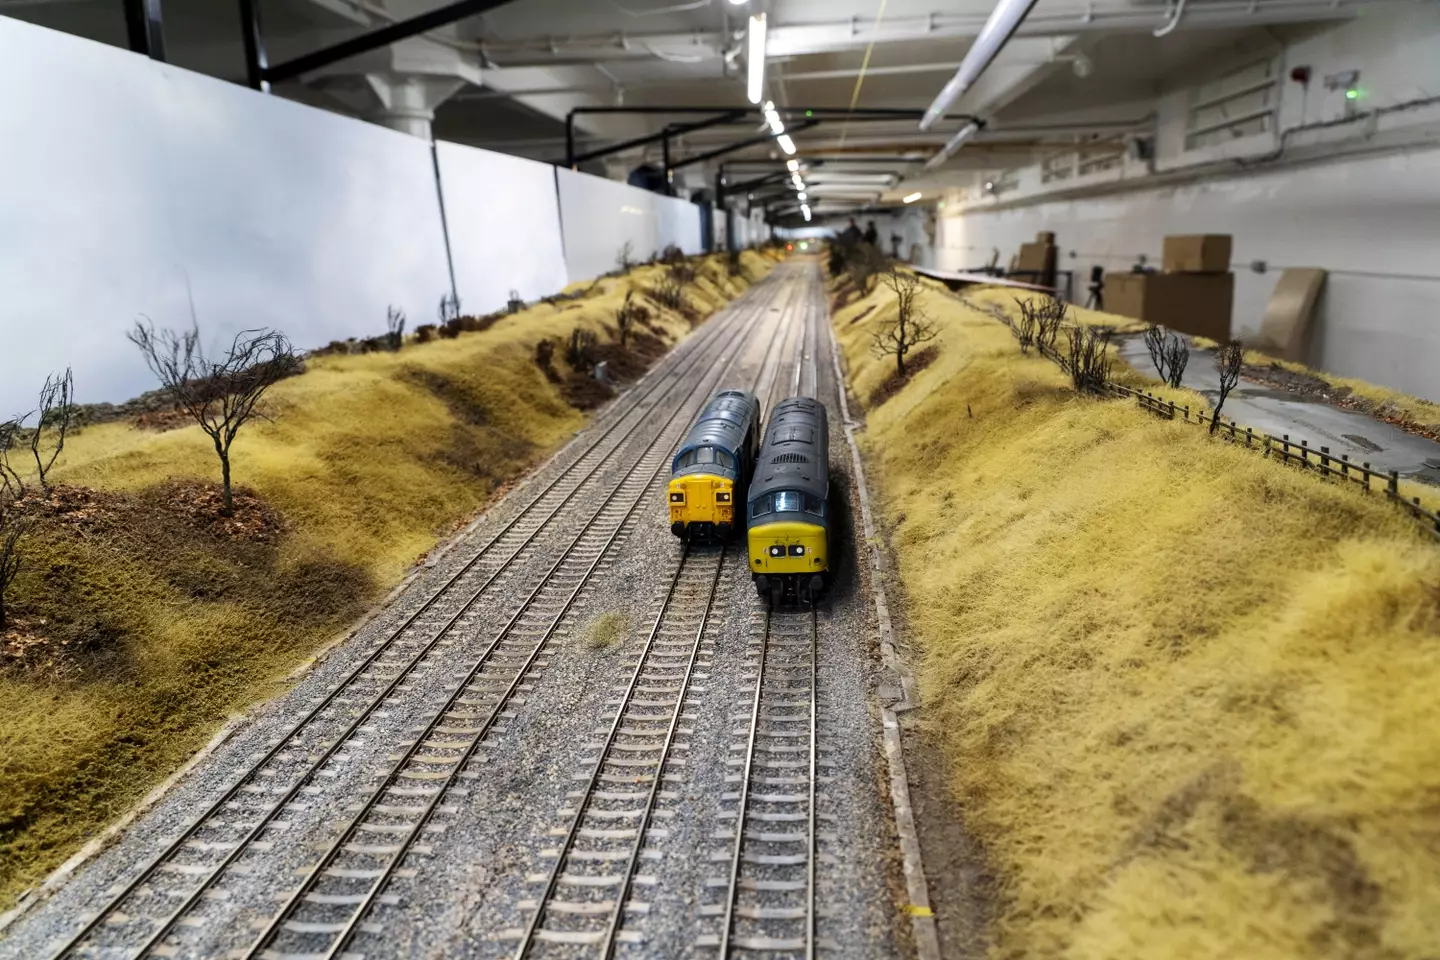 The model railway features a lot of detail.